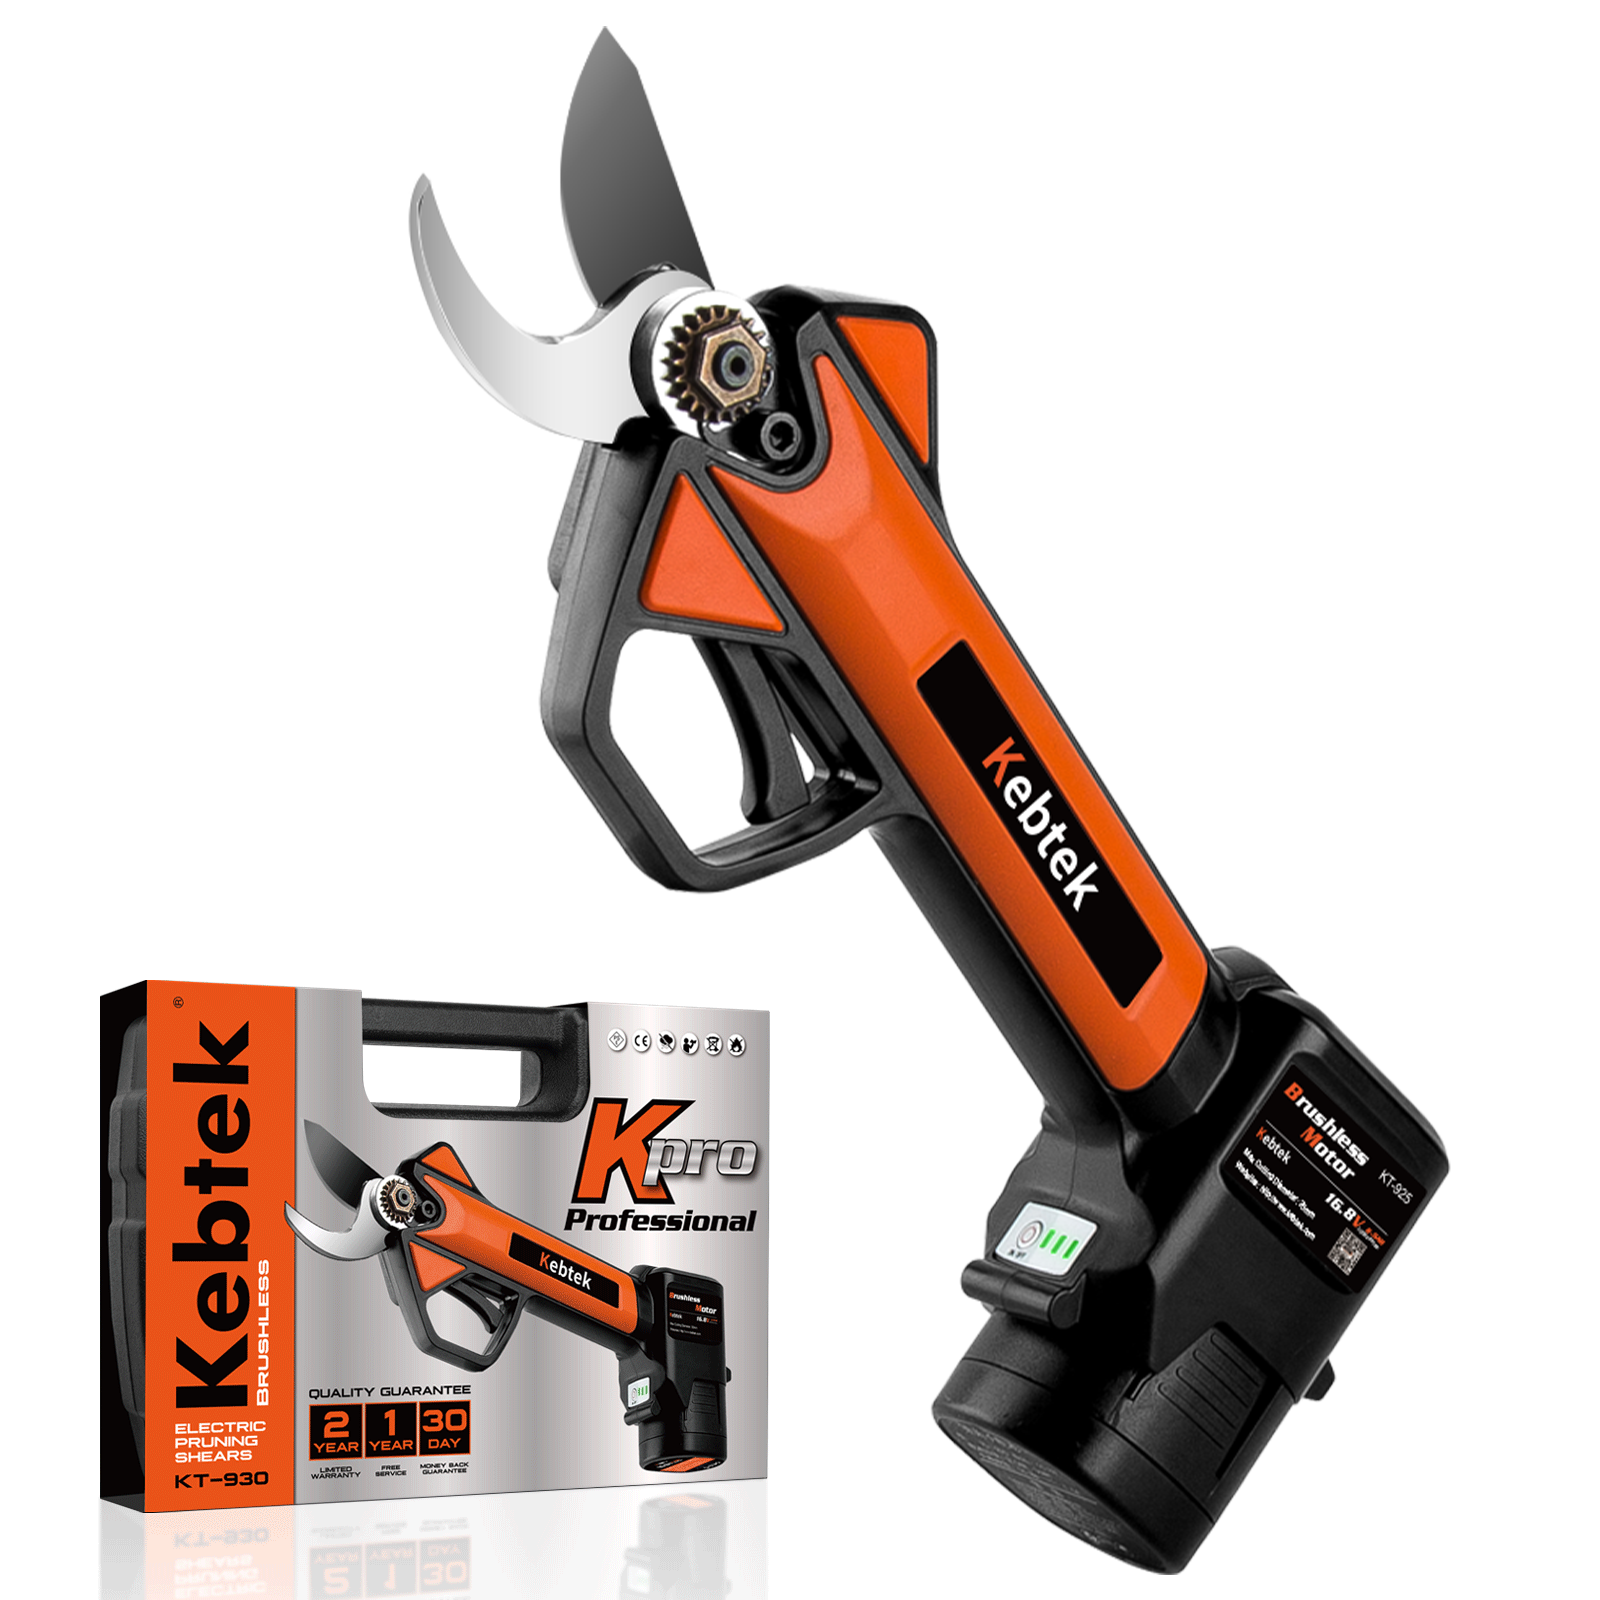 Kebtek Cordless Electric Pruning Shear, Cordless Pruner Battery Powered with 2PCS Backup Lithium Battery 2500mAh, 30mm -KT930(1.2 Inch) Cutting Diameter